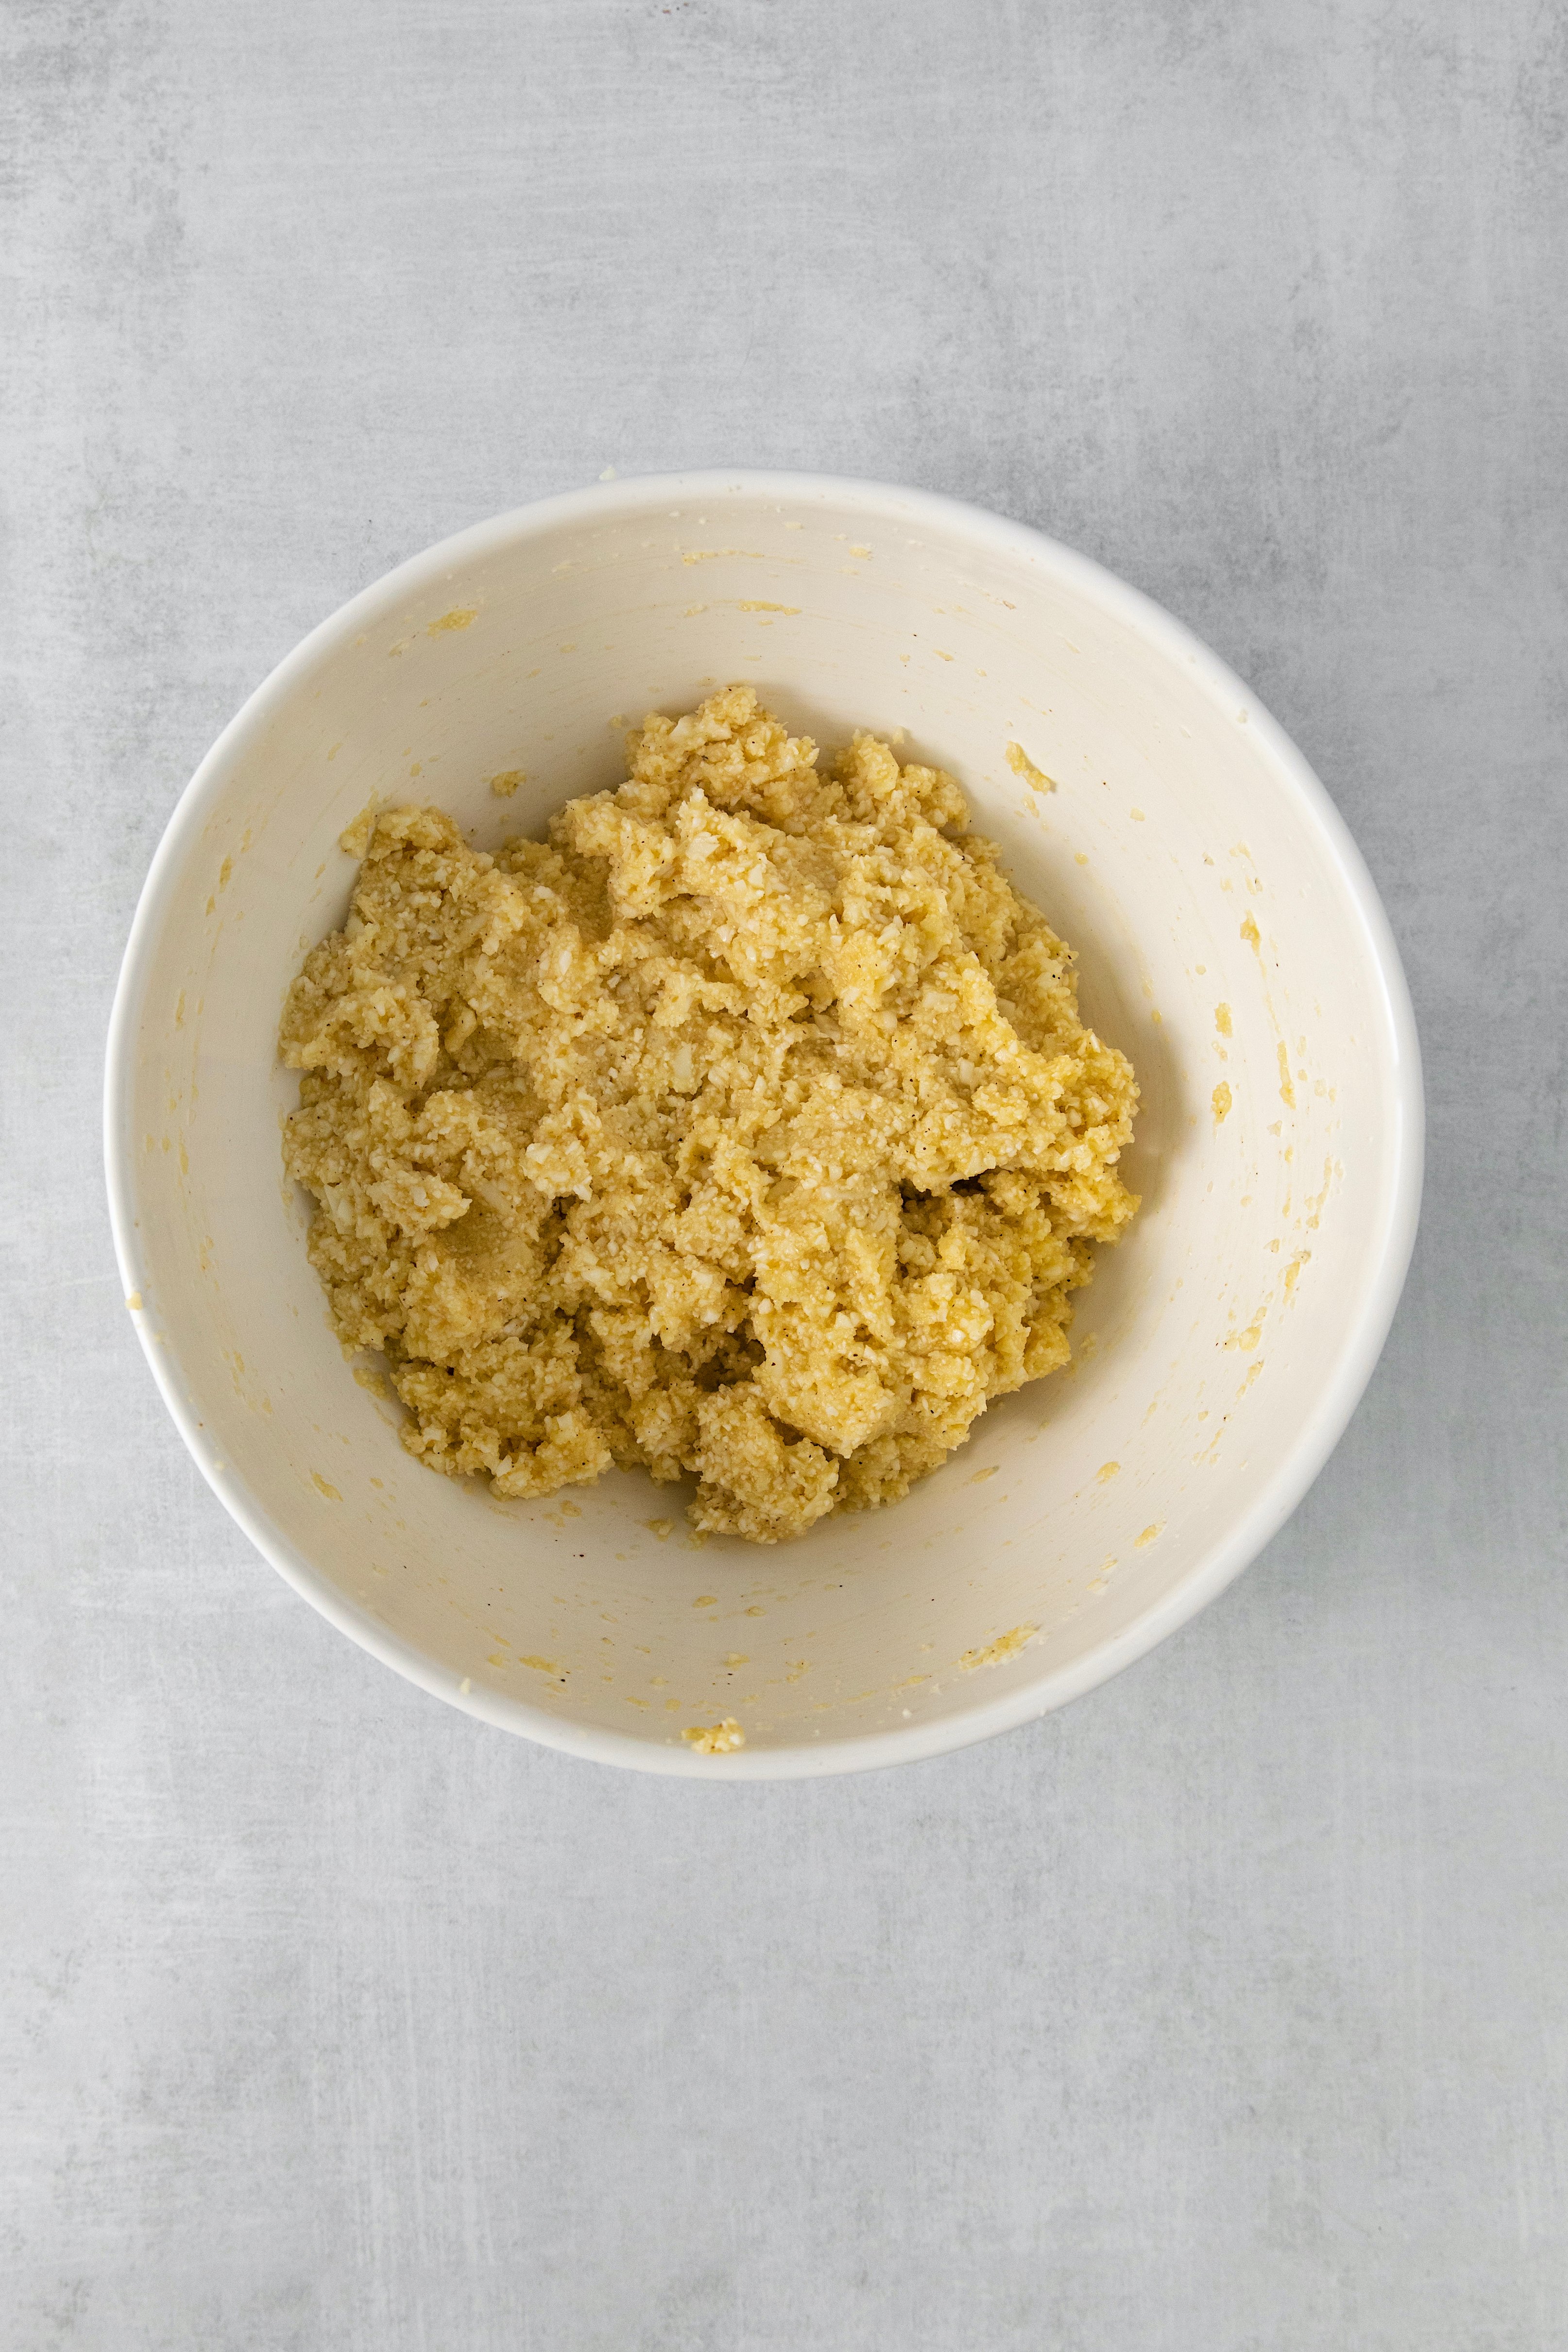 cauliflower, egg, flour, and spices mixed in a bowl.